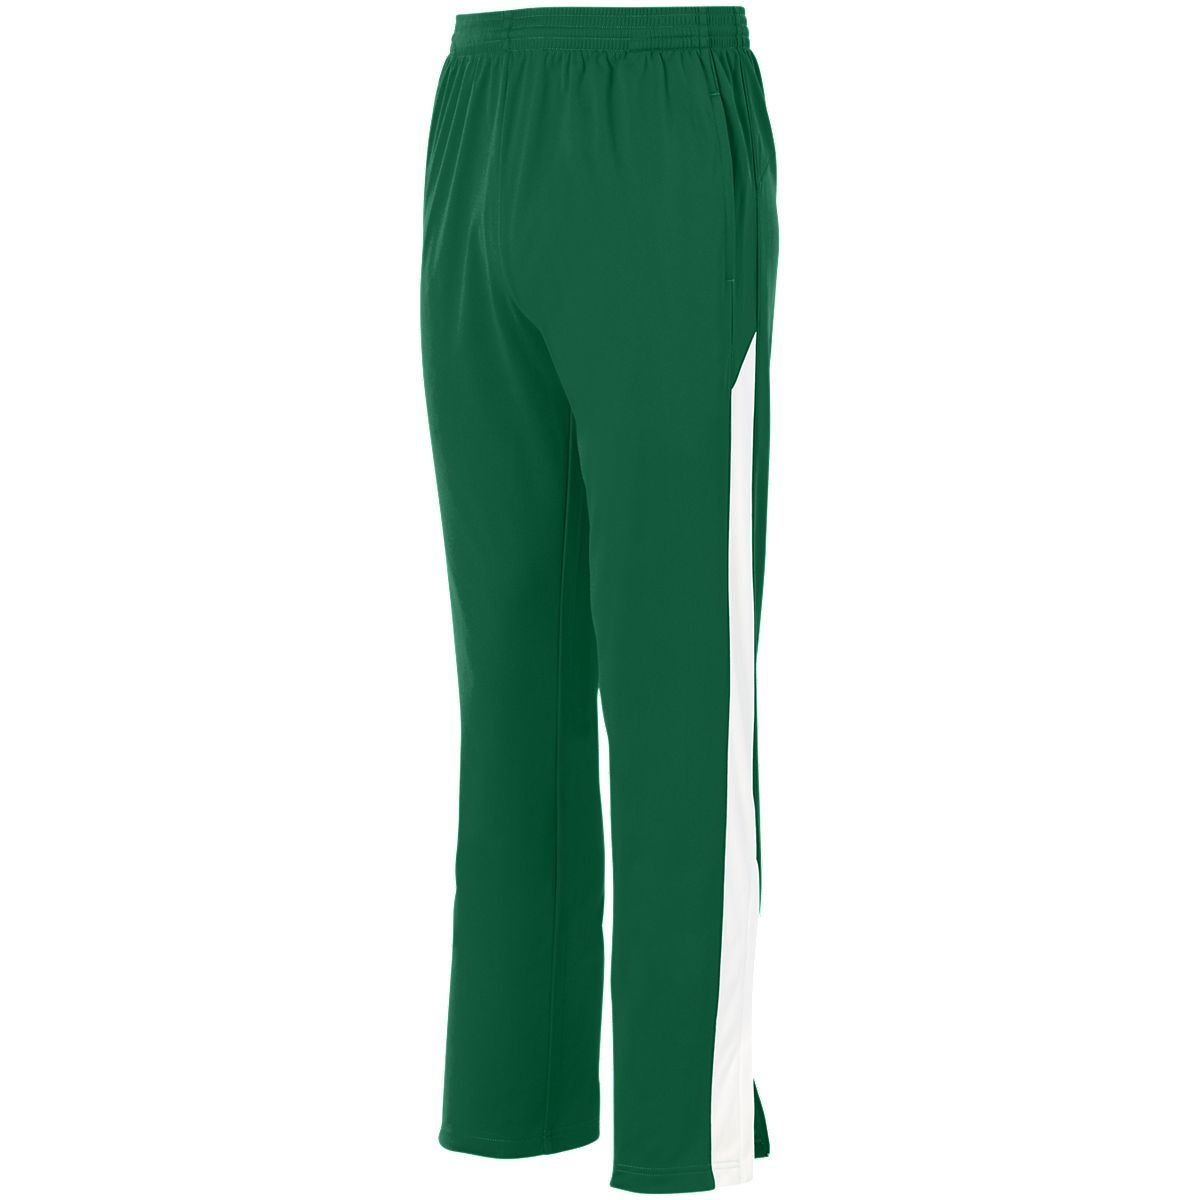 Augusta Sportswear Medalist Pant 2.0 in Dark Green/White  -Part of the Adult, Adult-Pants, Pants, Augusta-Products product lines at KanaleyCreations.com